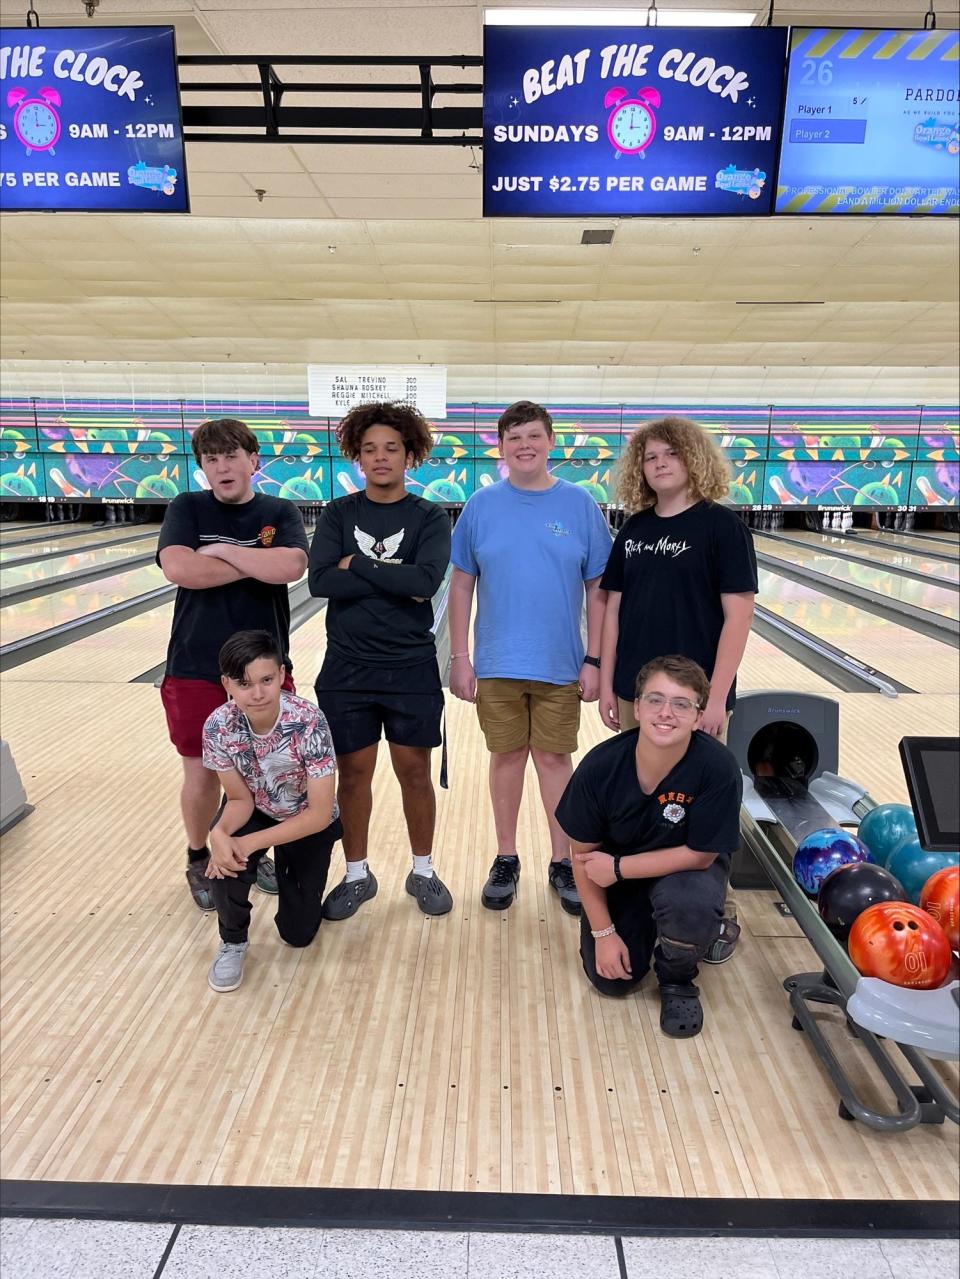 Lake Gibson bowling is in full swing. Starting from left to right in the back are Paul Stiles, Alex Mendieta, Bryce Verhoeven, and Truett Dodd. On the bottom row from left to right are
Fabian Vargas and Ethan Tillery.